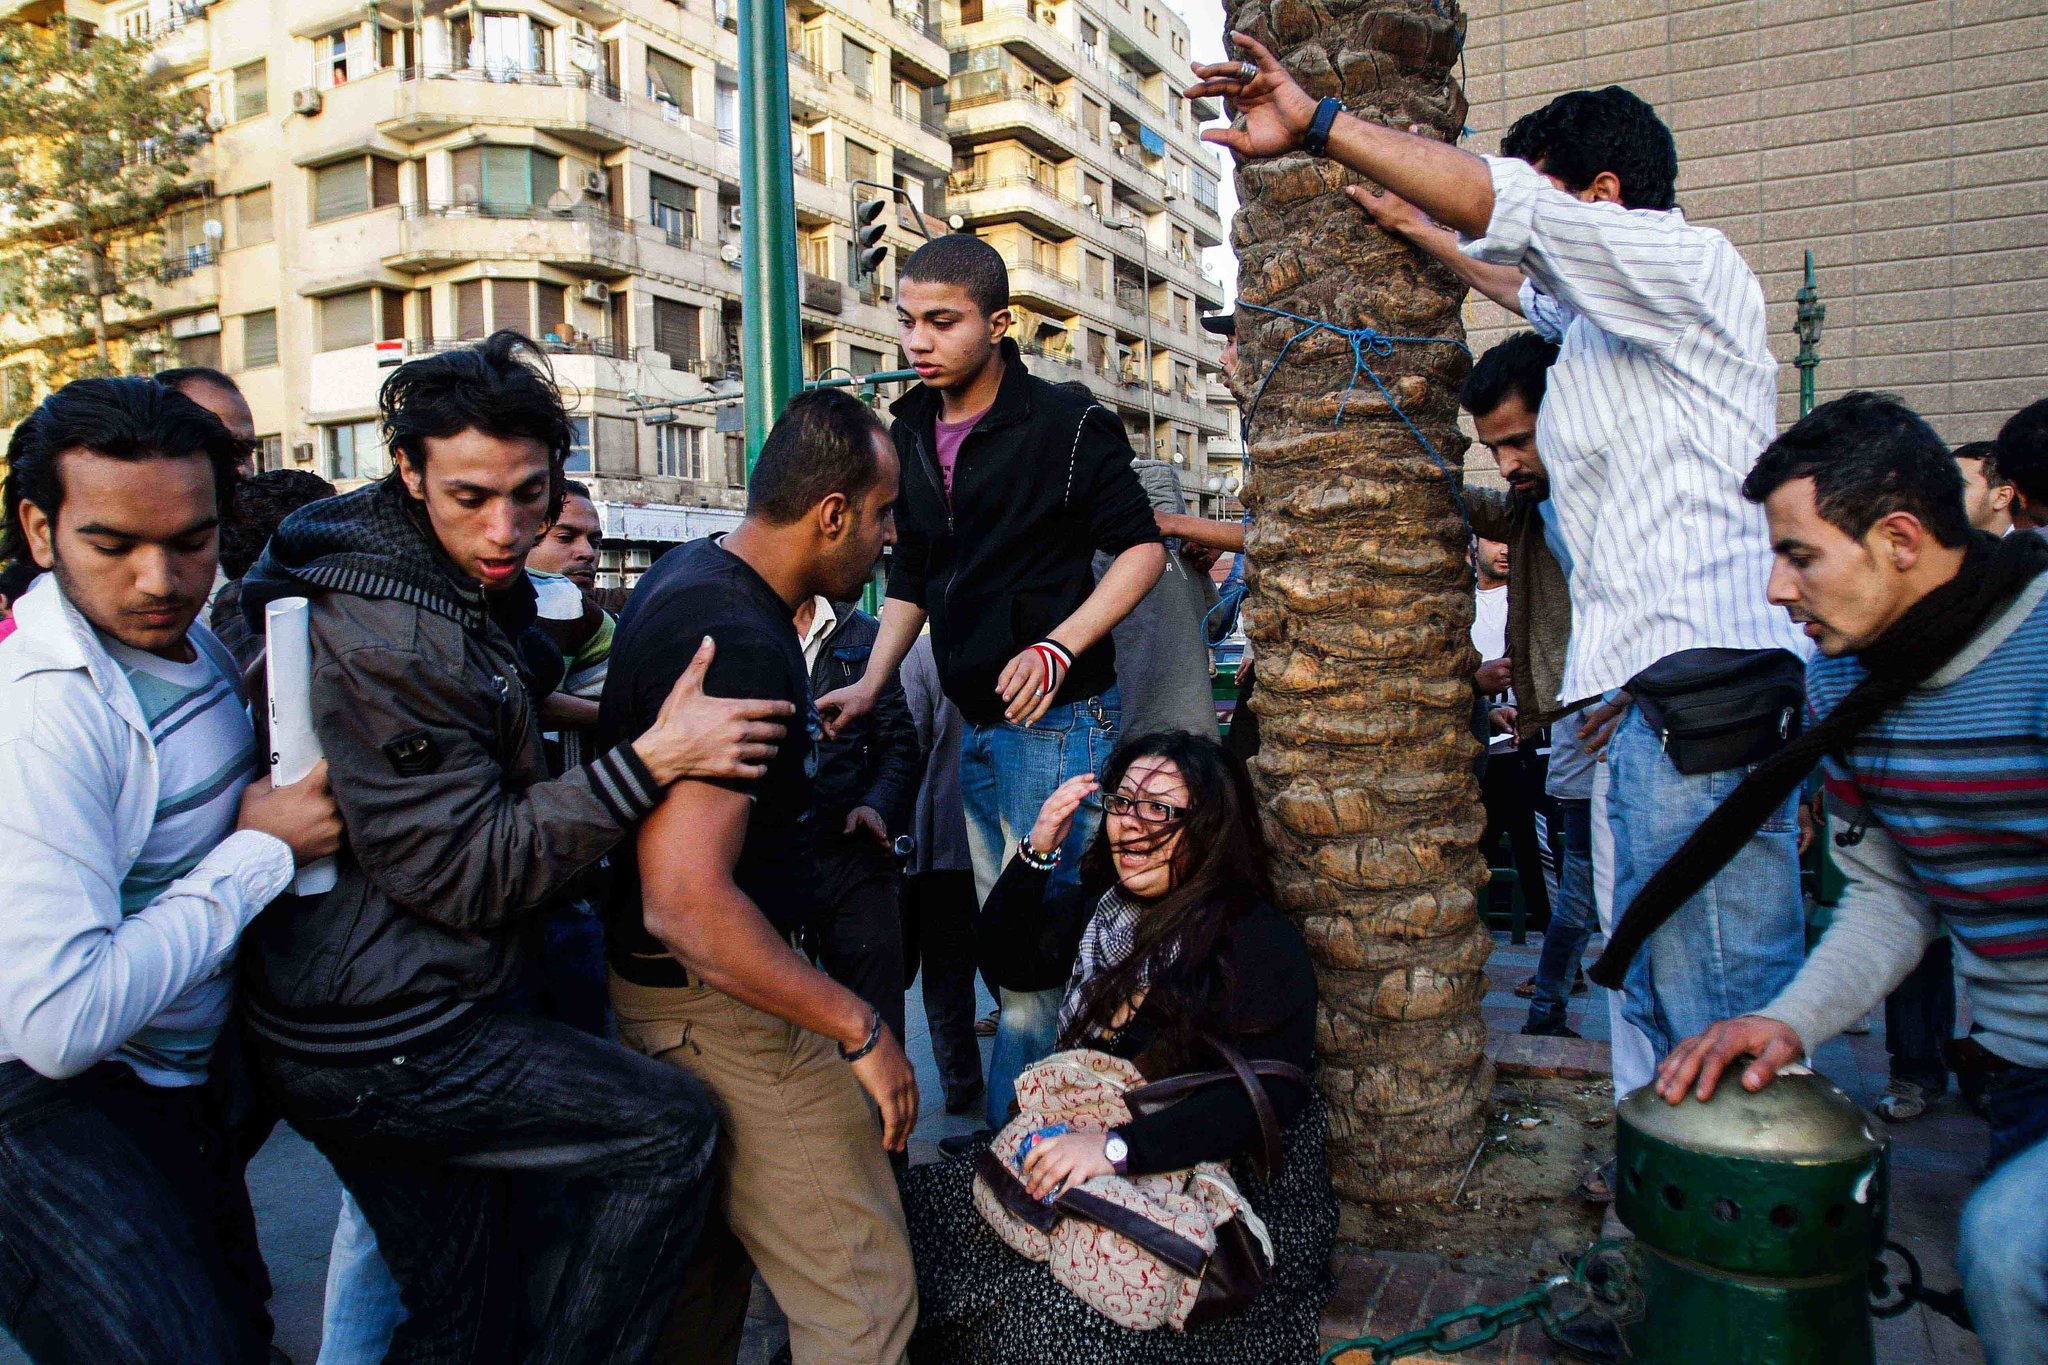 An Egyptian woman was assaulted by several men in Tahrir Square during a march for International Women's Day in March 2011. Credit: Eman Helal